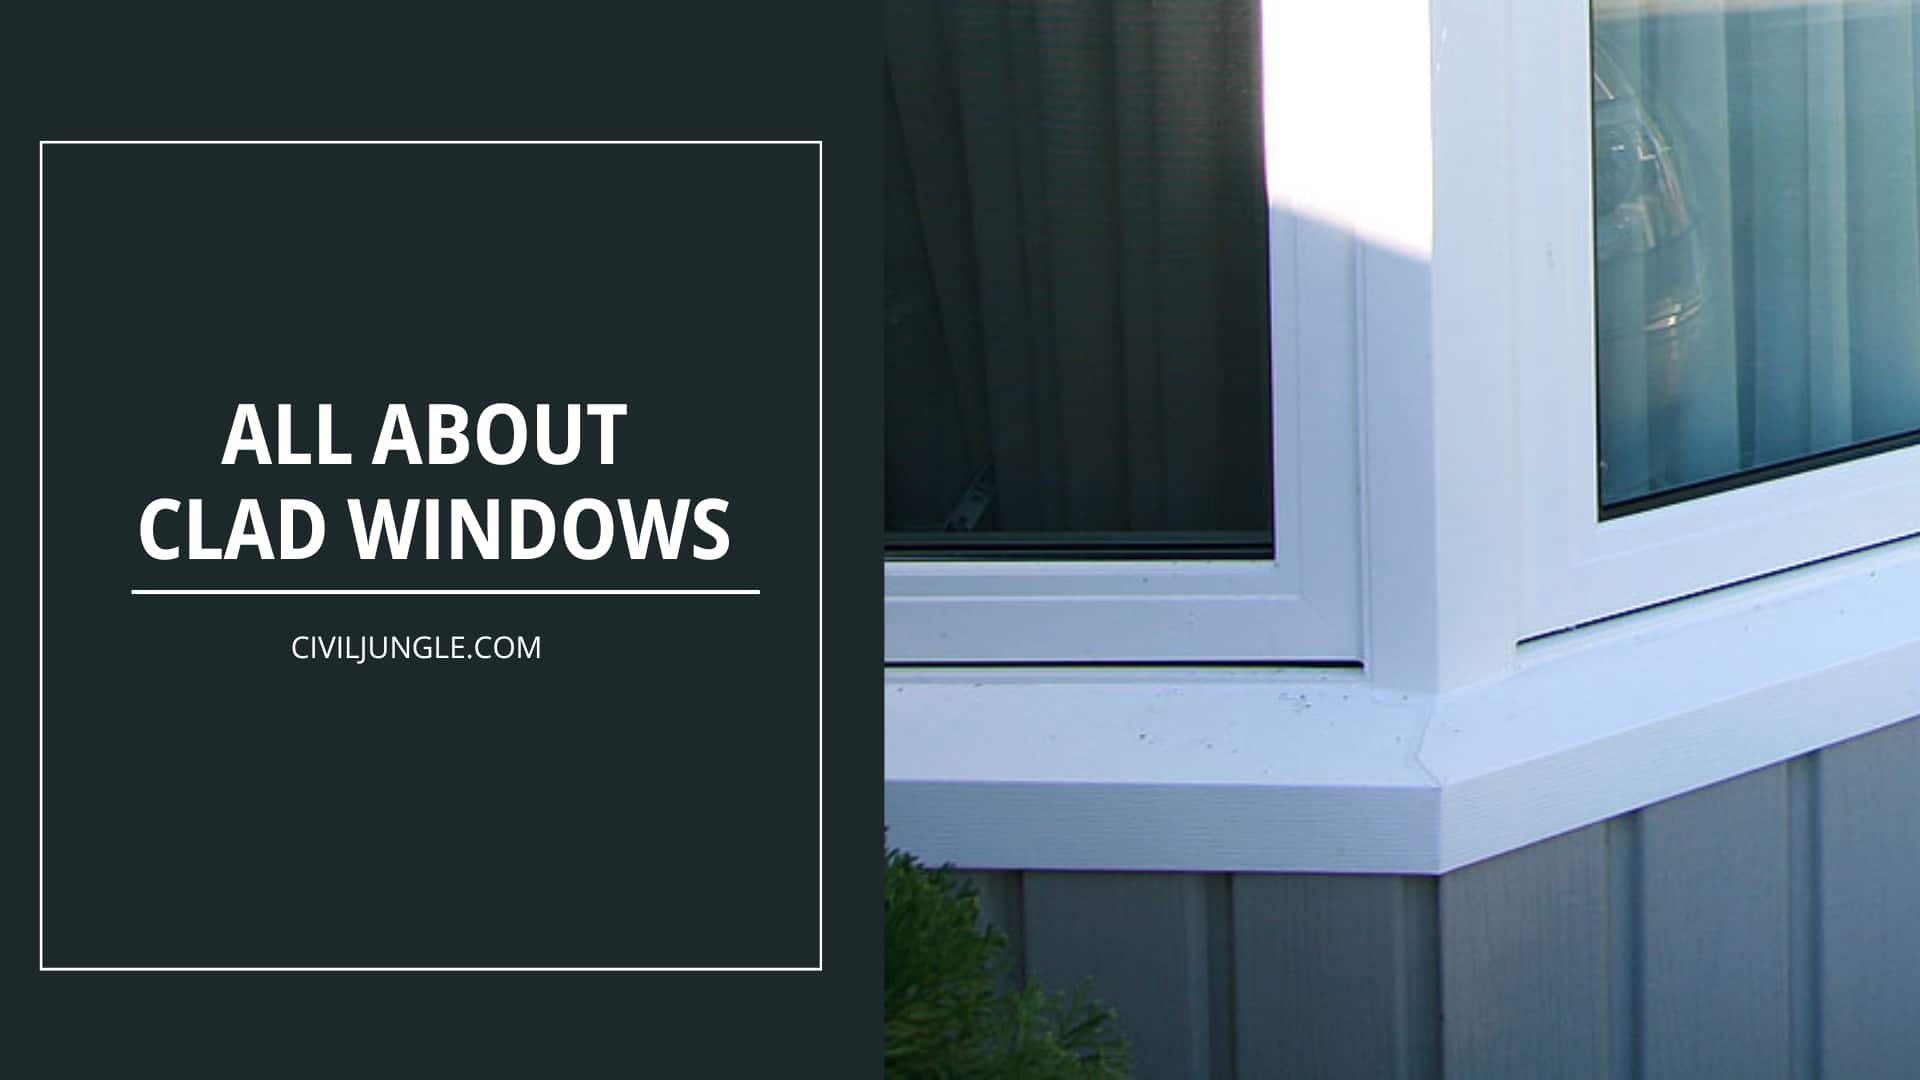 ALL ABOUT CLAD WINDOWS